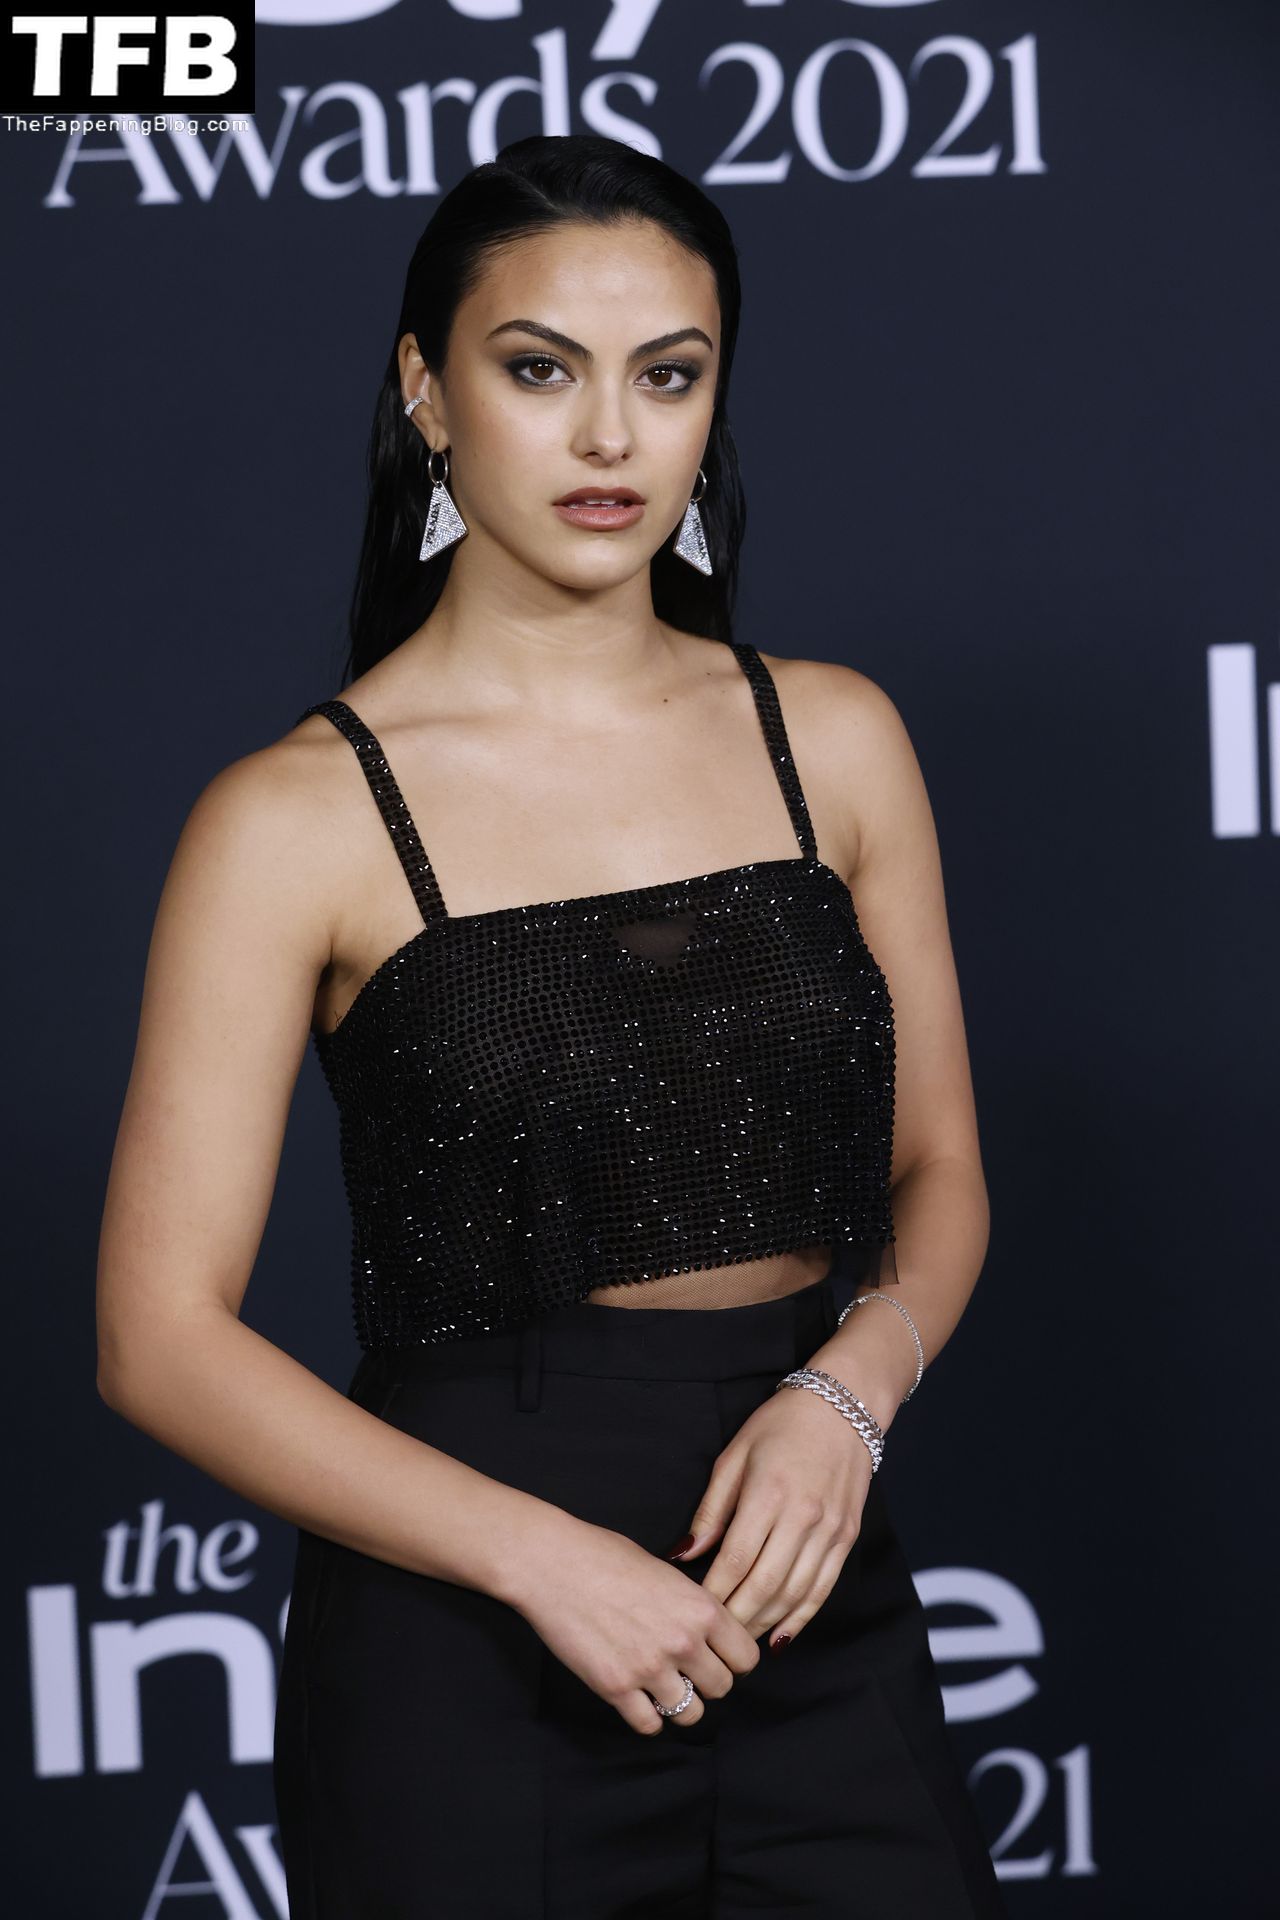 Camila-Mendes-See-Through-Tits-The-Fappening-Blog-31.jpg